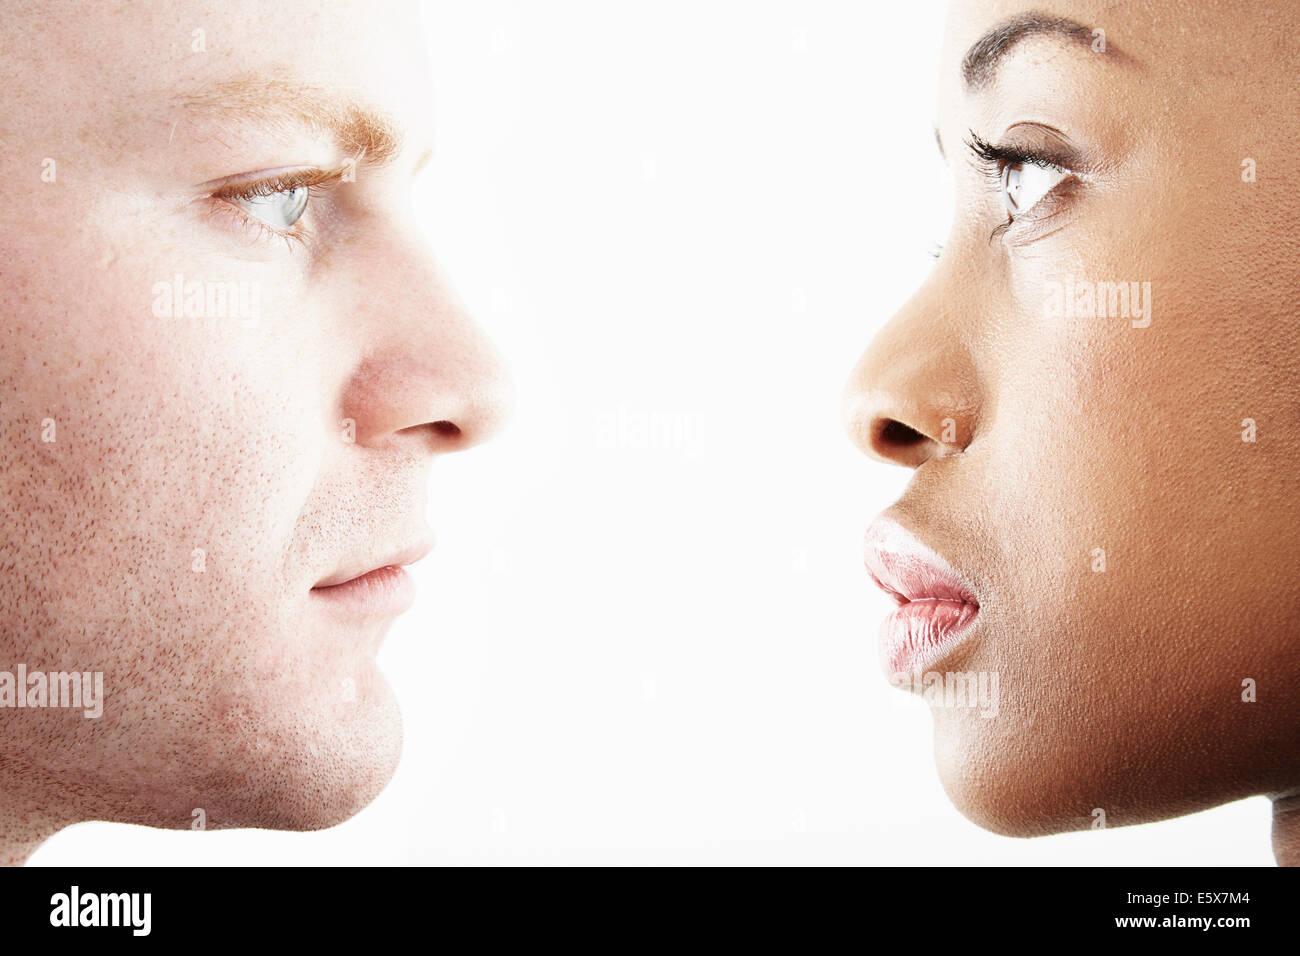 Cropped studio portrait of young couple face to face in profile Stock Photo